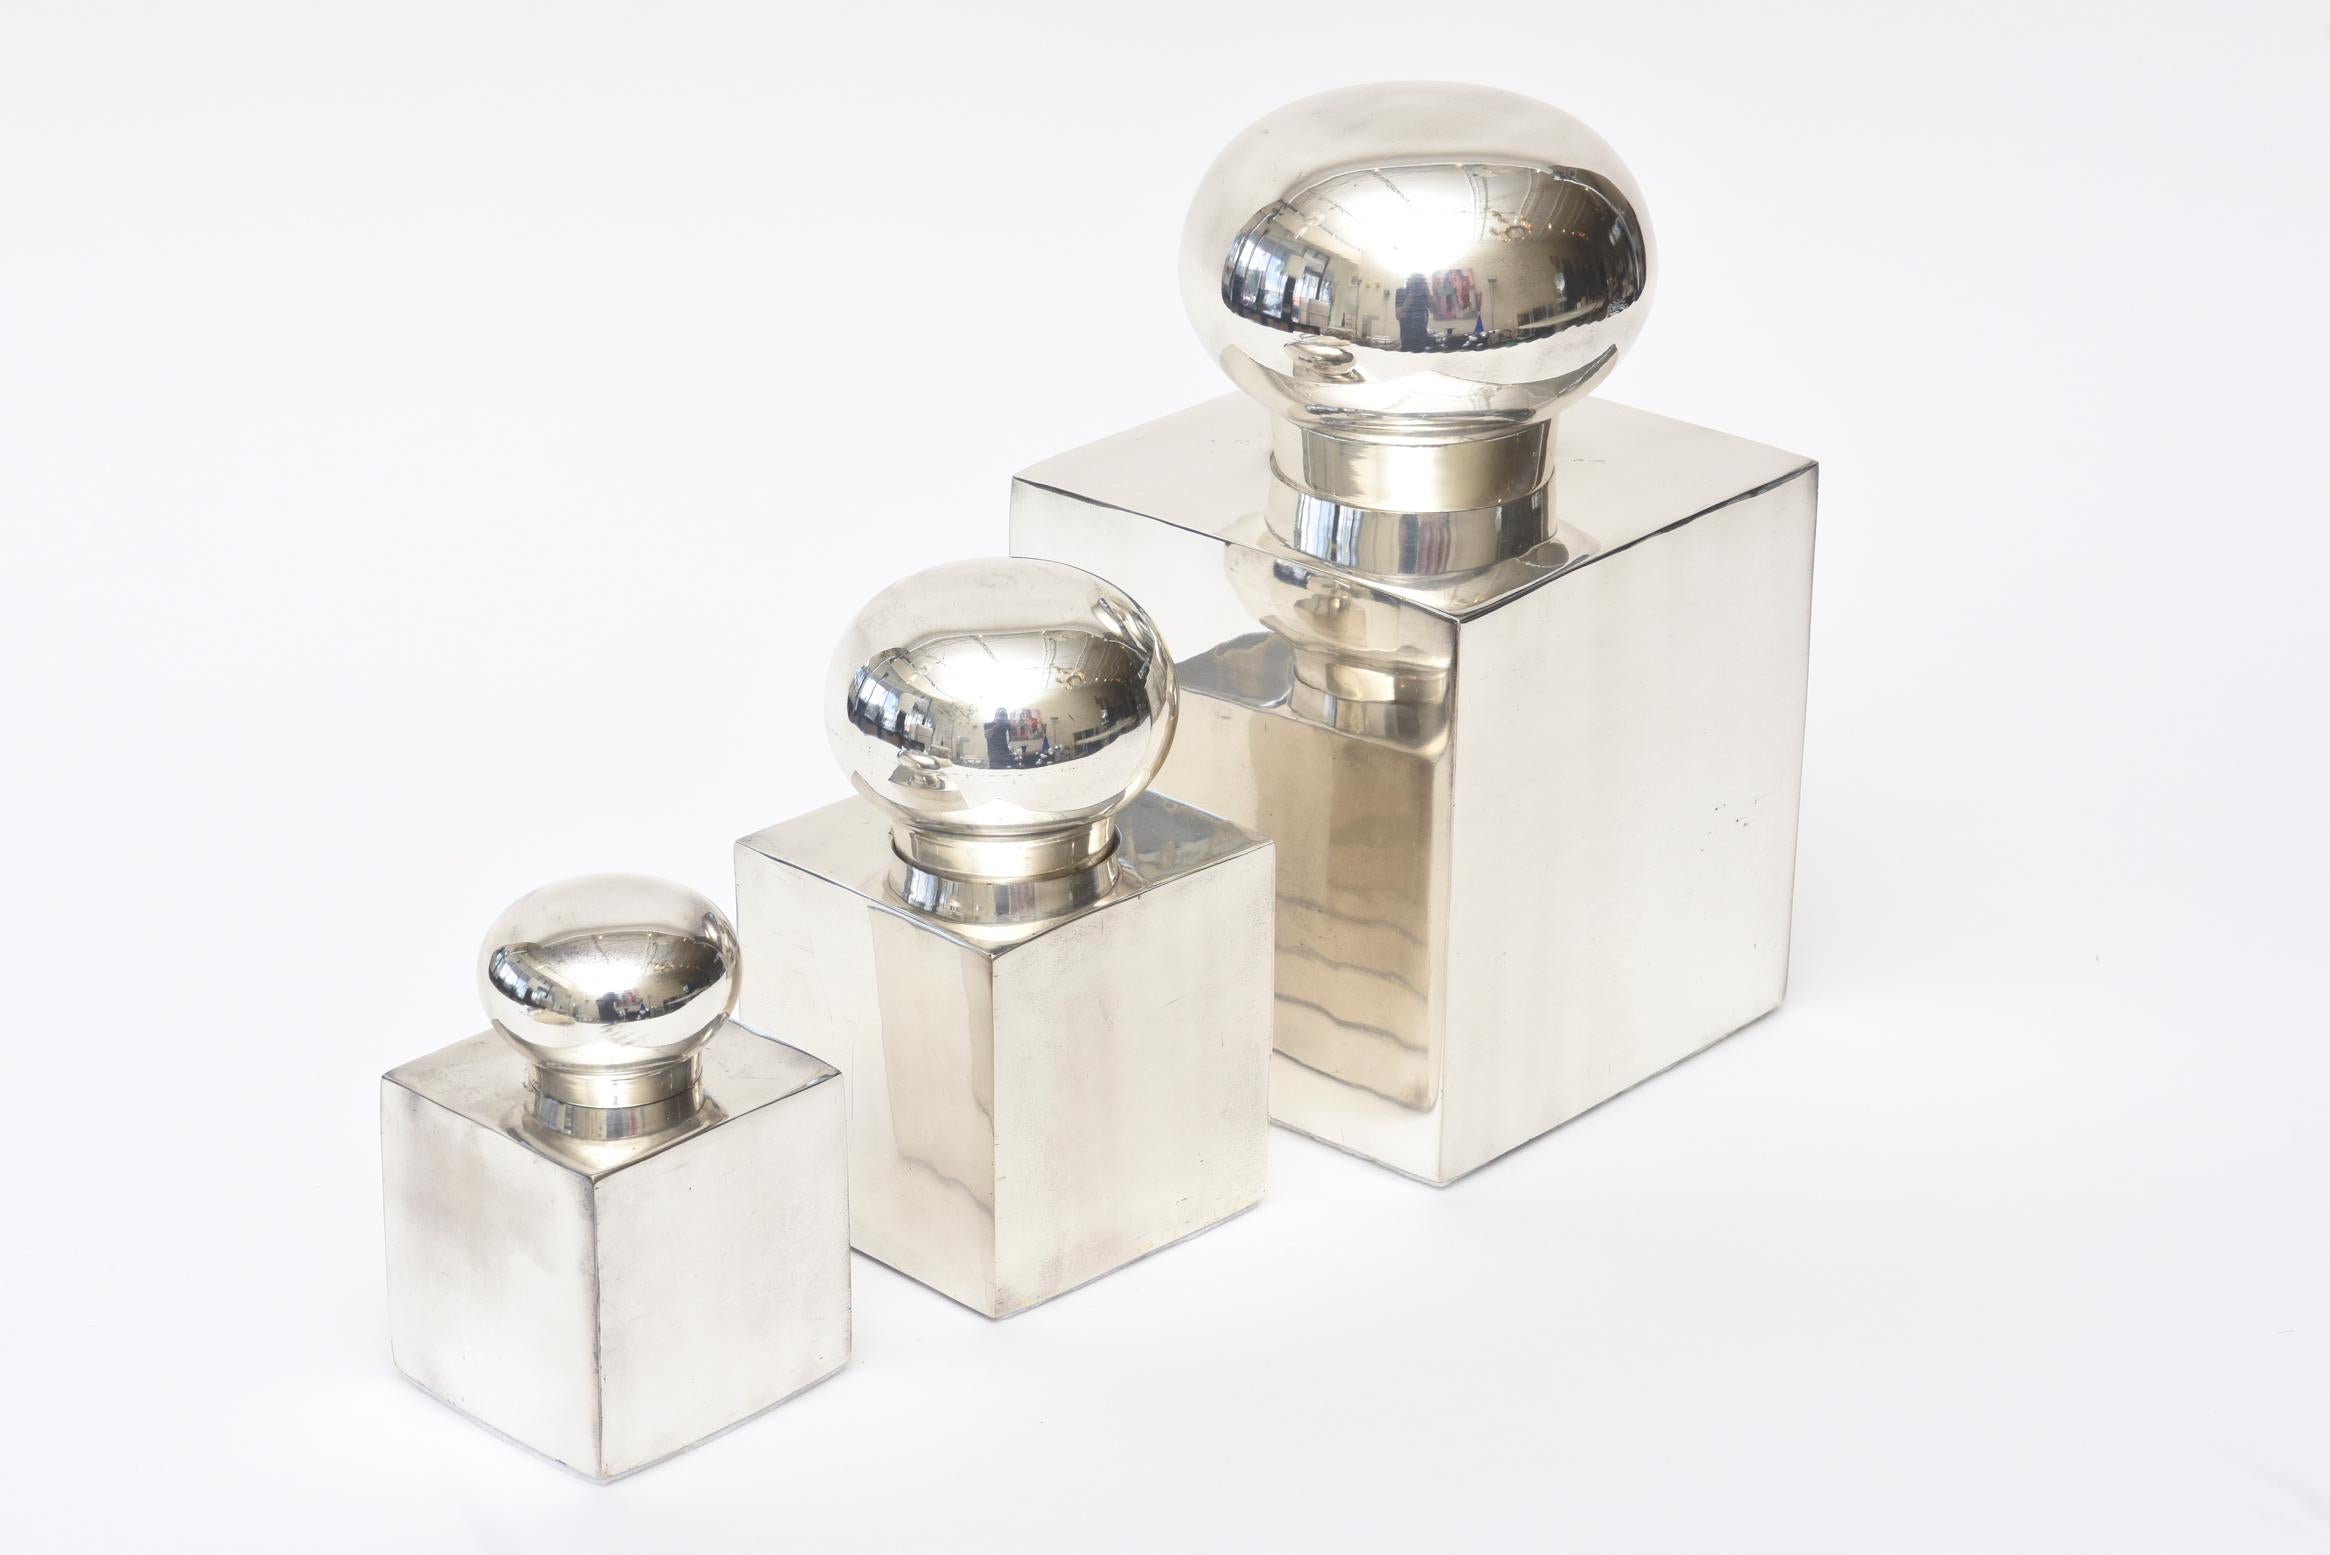 These set of 3 Italian vintage silver-plate square lidded boxes or objects or desk accessories all have a rounded ball lid that turns and comes off. They are 3 varying heights with the largest being 9.5